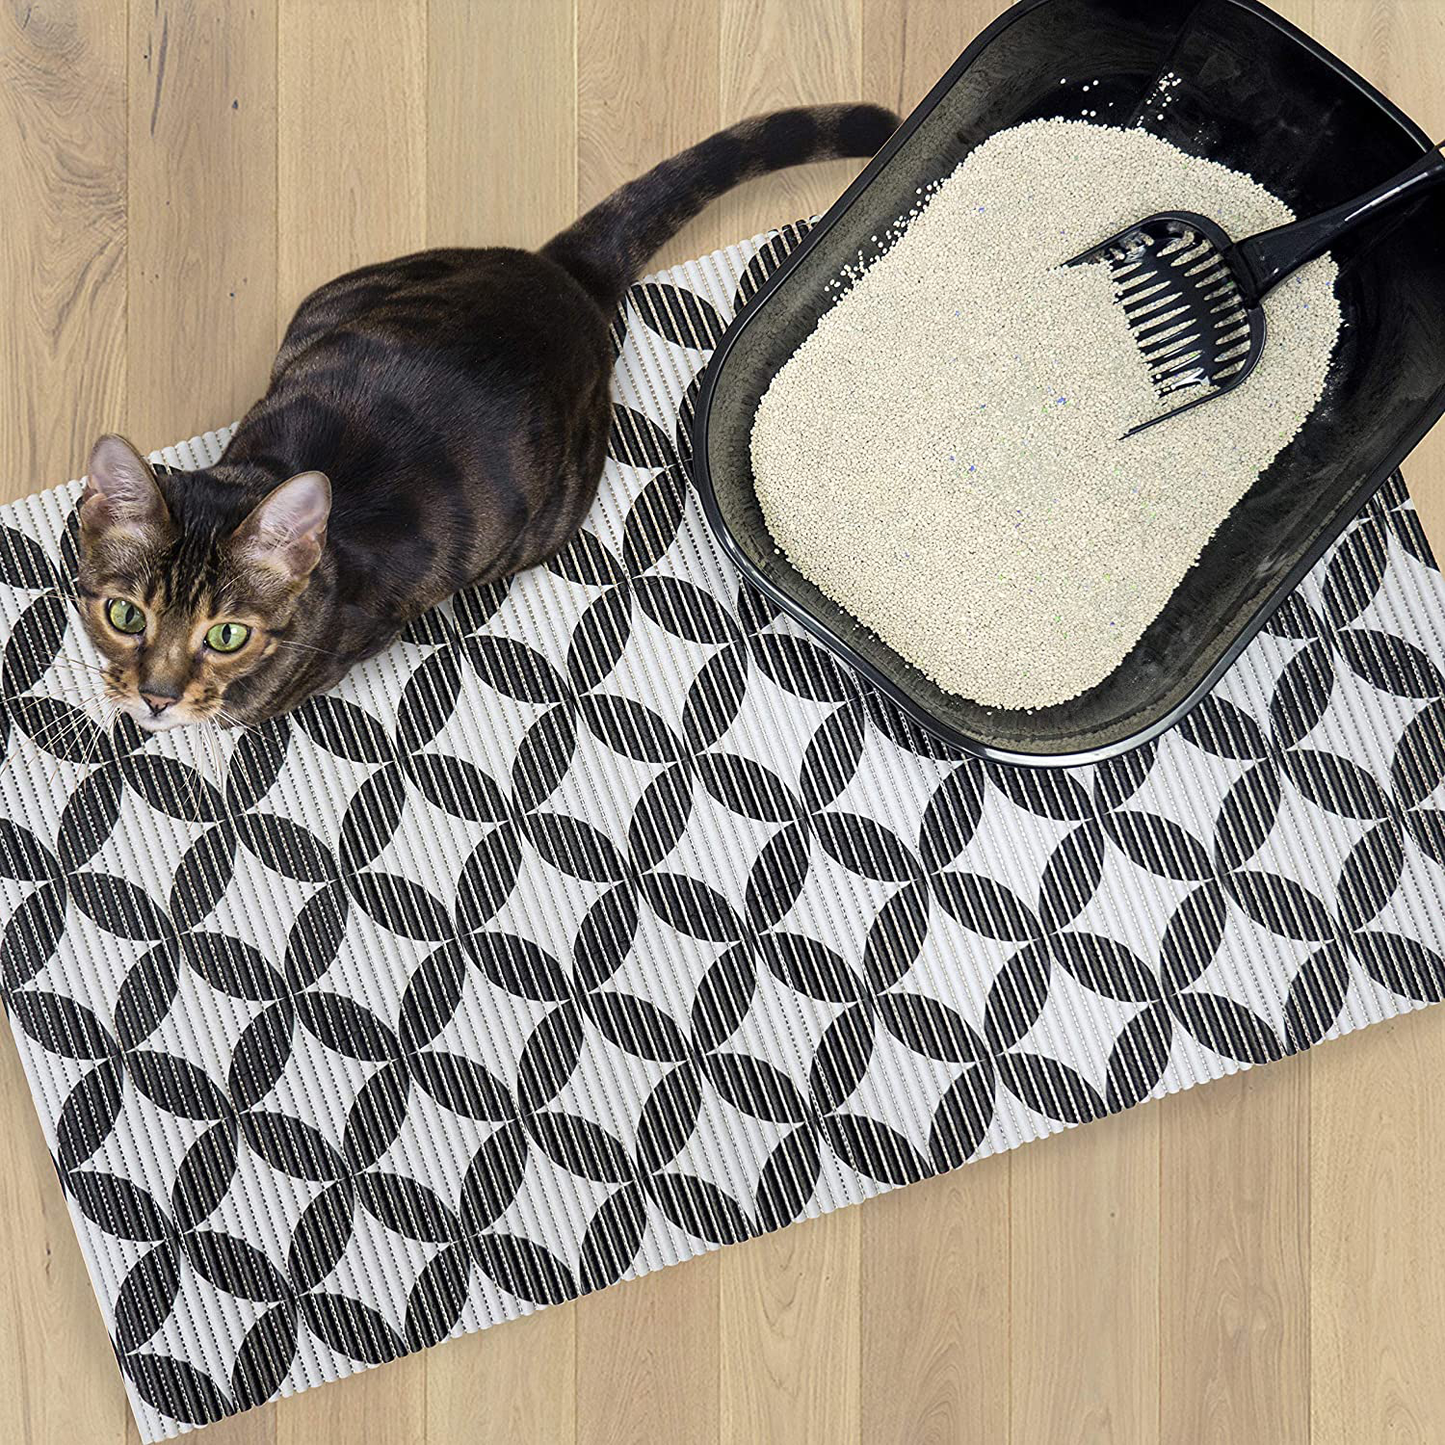 Fresh Kitty Durable XL Jumbo Foam Litter Box Mat – BPA and Phthalate Free, Water Resistant, Traps Litter from Box, Scatter Control, Easy Clean Mats – Gray Pattern 40”X 25” (9052)